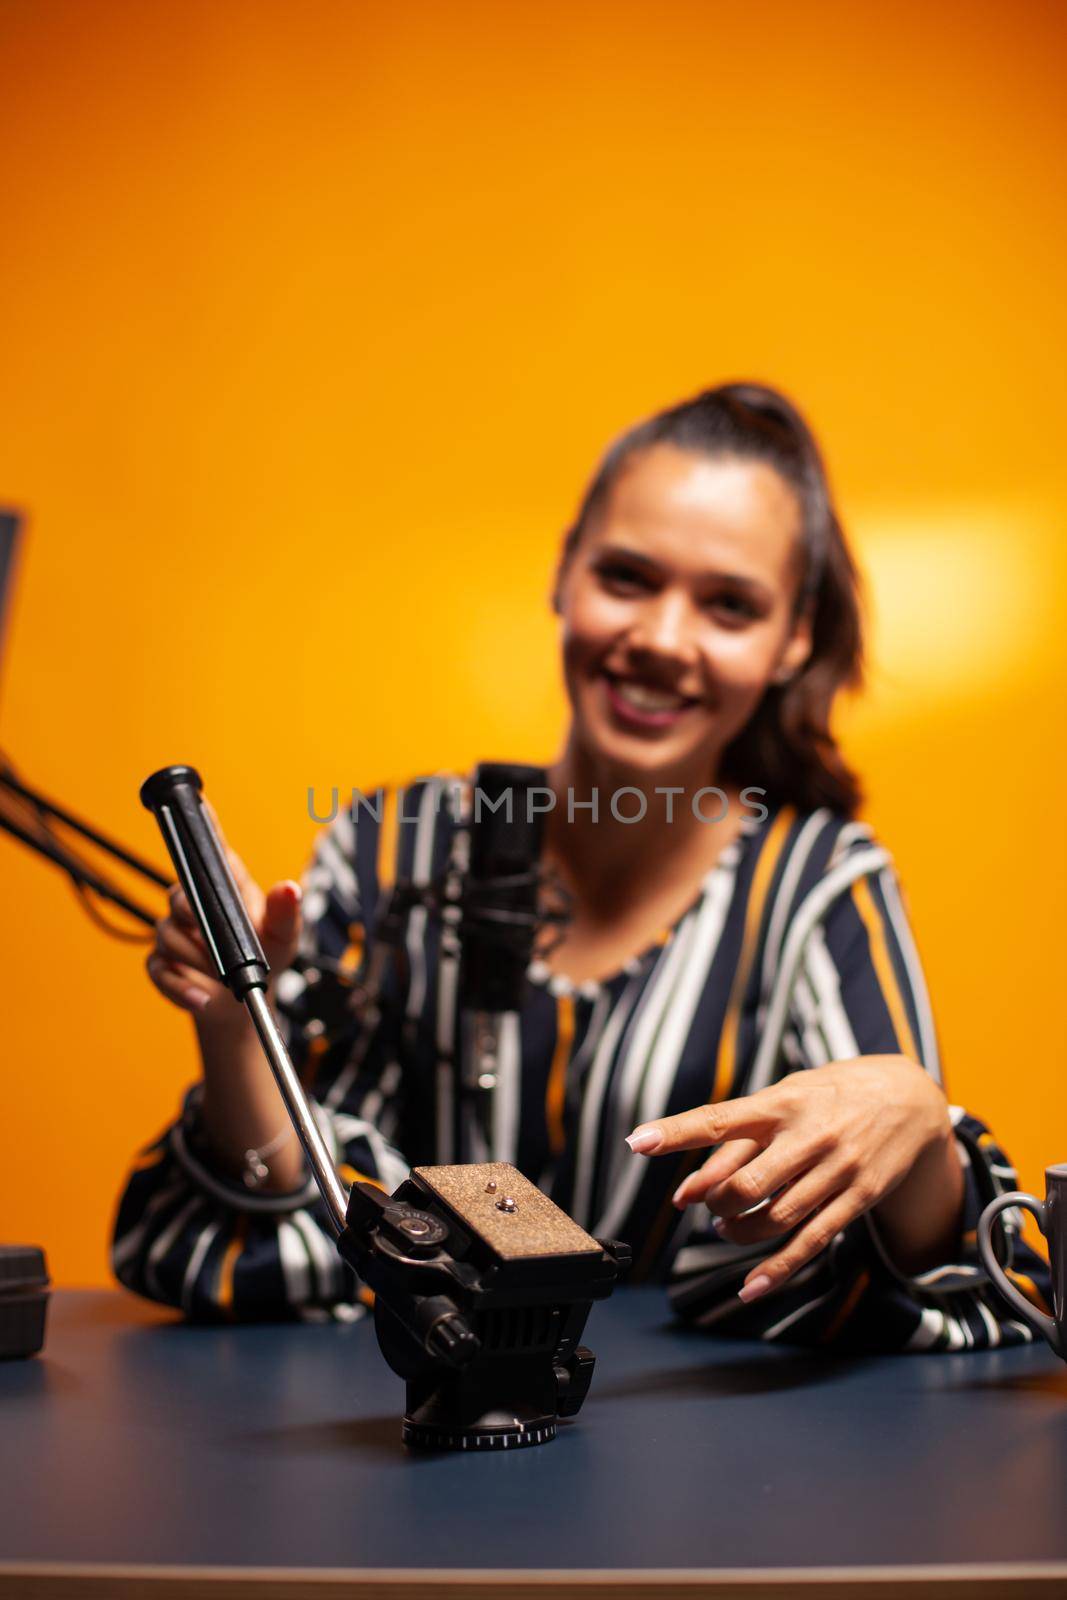 Videographer pointing at fluid head for tripod while recording video for followers on social media. Social media star making online internet content about video equipment for web subscribers , film